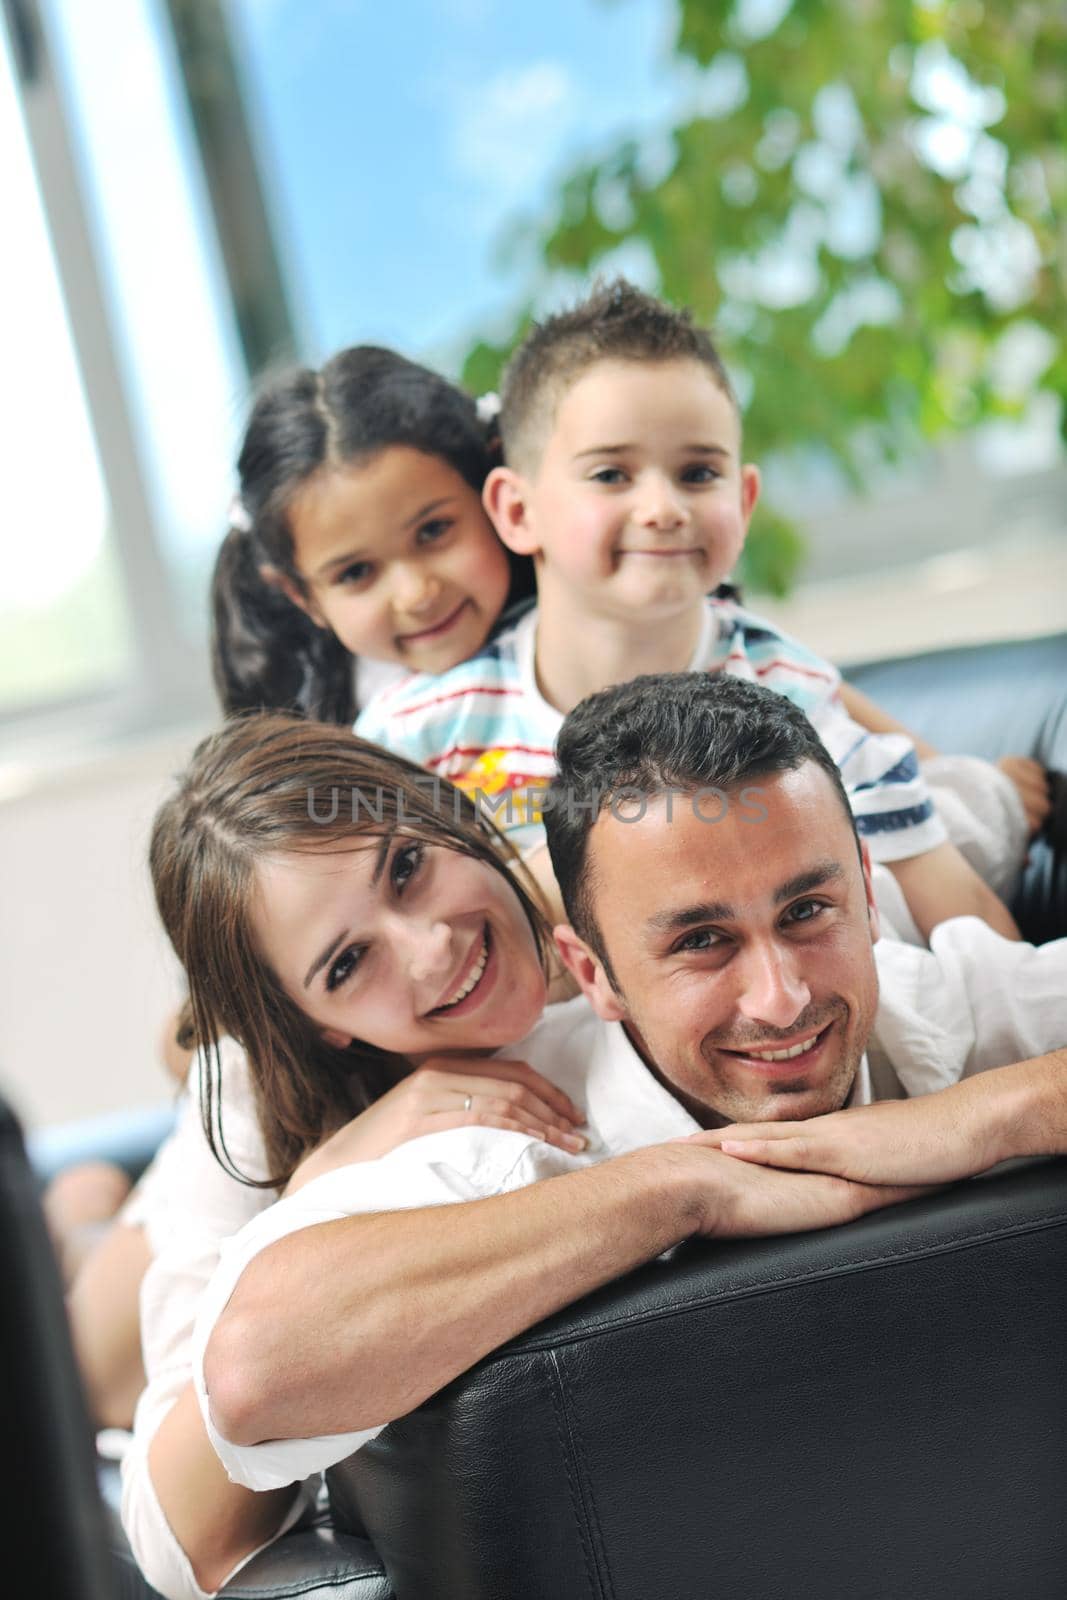 happy young family relax and have fun at modern home indooor